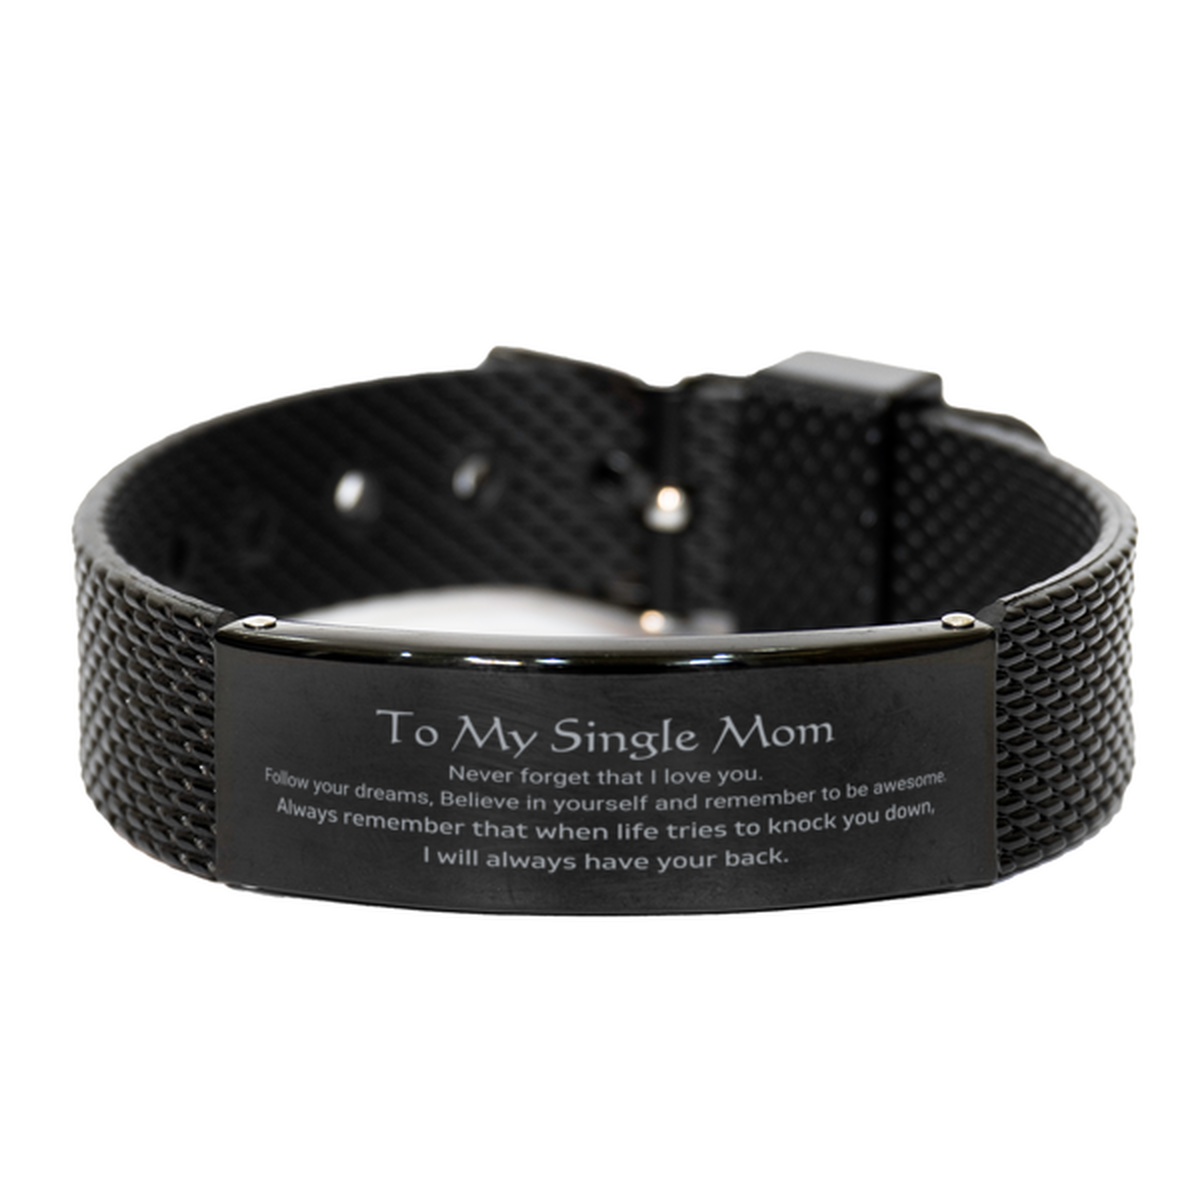 Inspirational Gifts for Single Mom, Follow your dreams, Believe in yourself, Single Mom Black Shark Mesh Bracelet, Birthday Christmas Unique Gifts For Single Mom